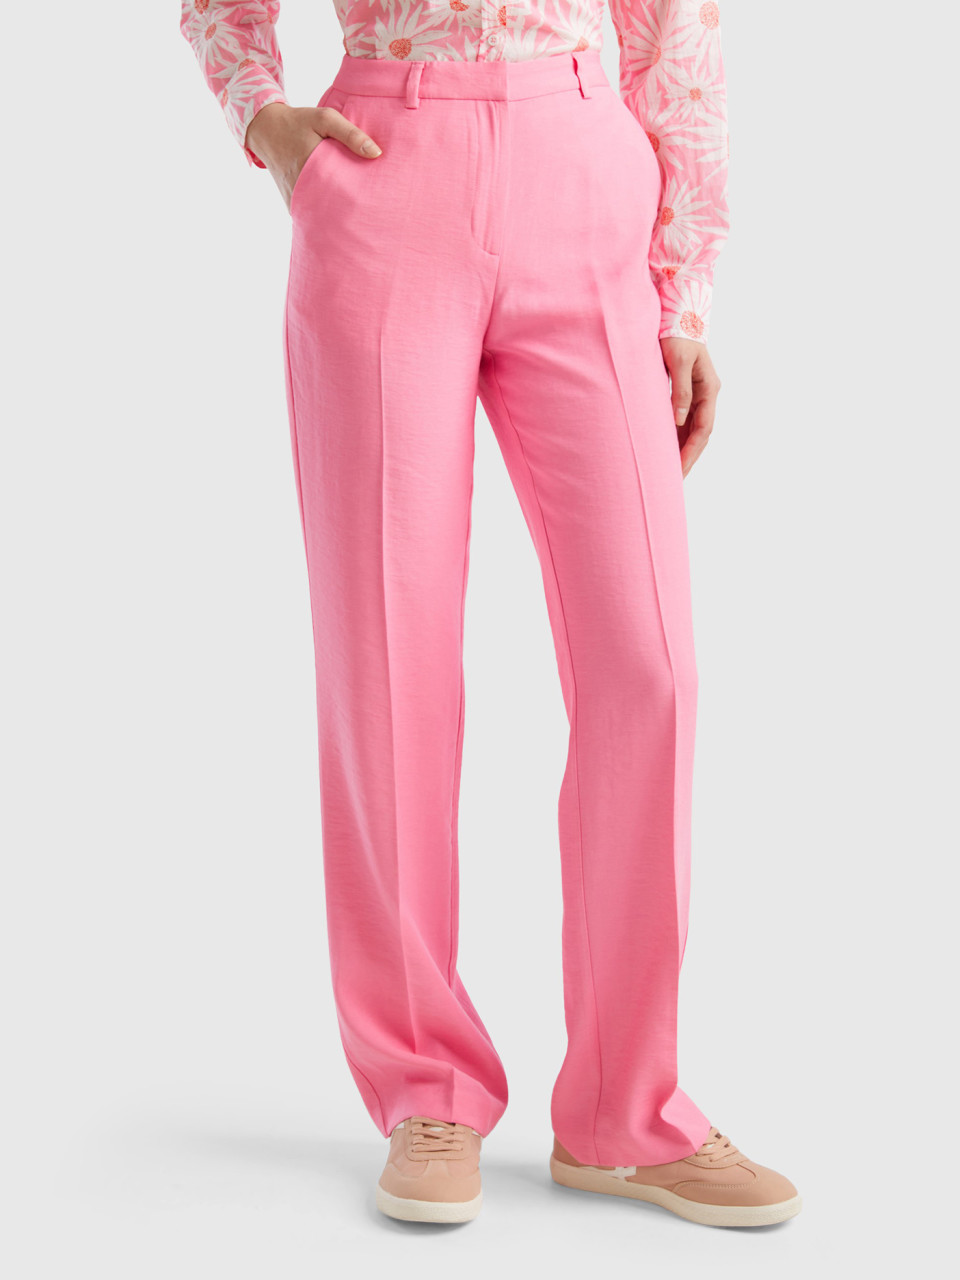 Benetton, Straight Leg Trousers With Crease, Pink, Women